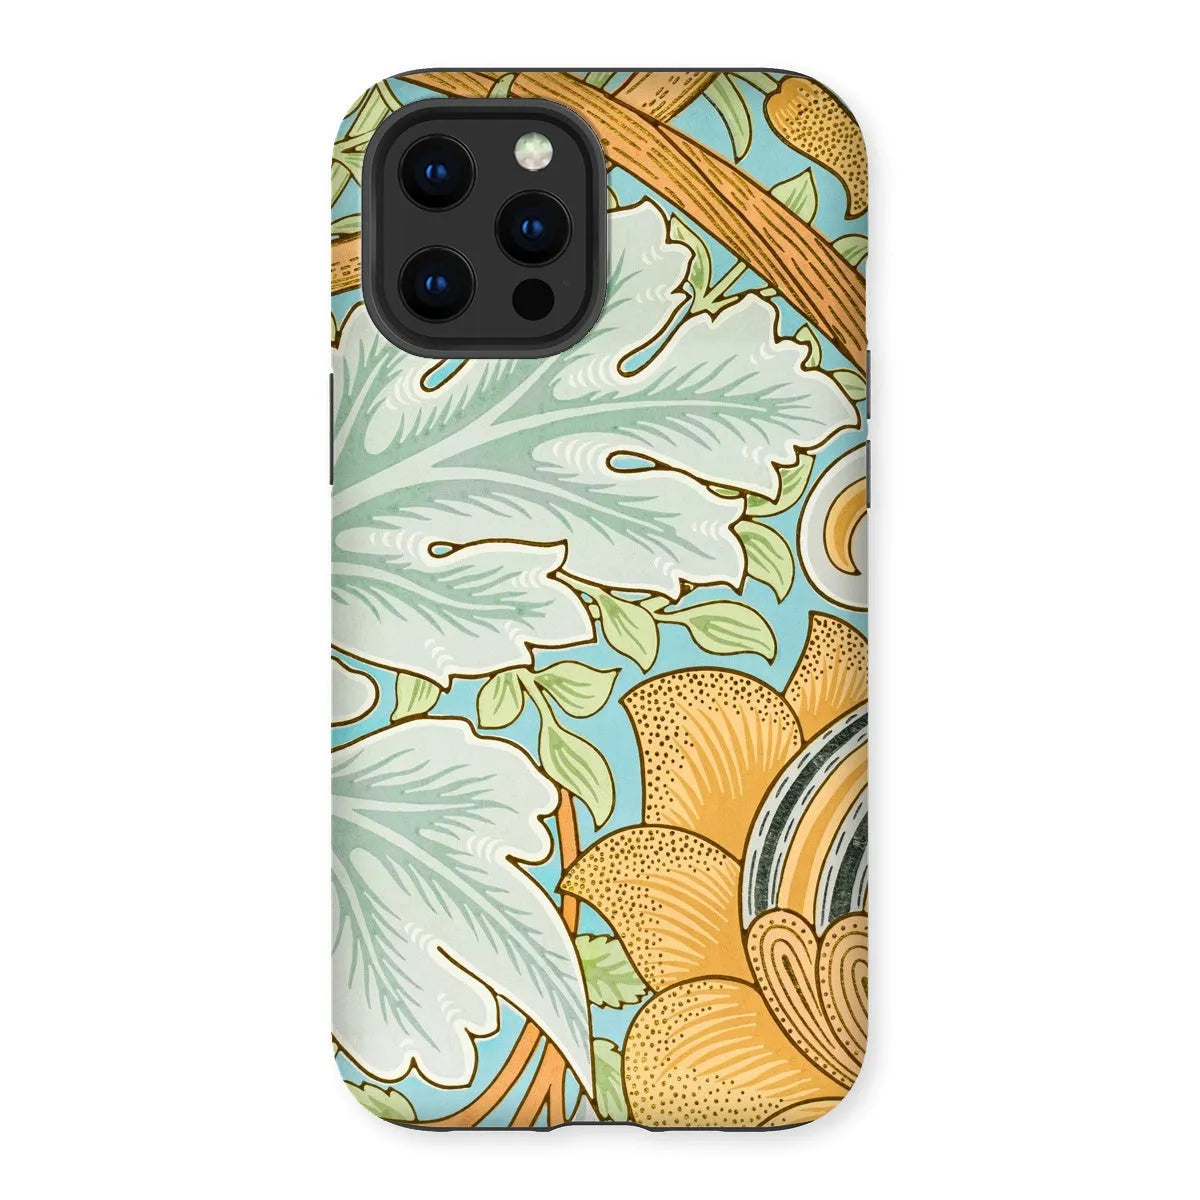 St. James - Arts And Crafts Phone Case - William Morris - Iphone 13 Pro Max / Matte - Mobile Phone Cases - Aesthetic Art